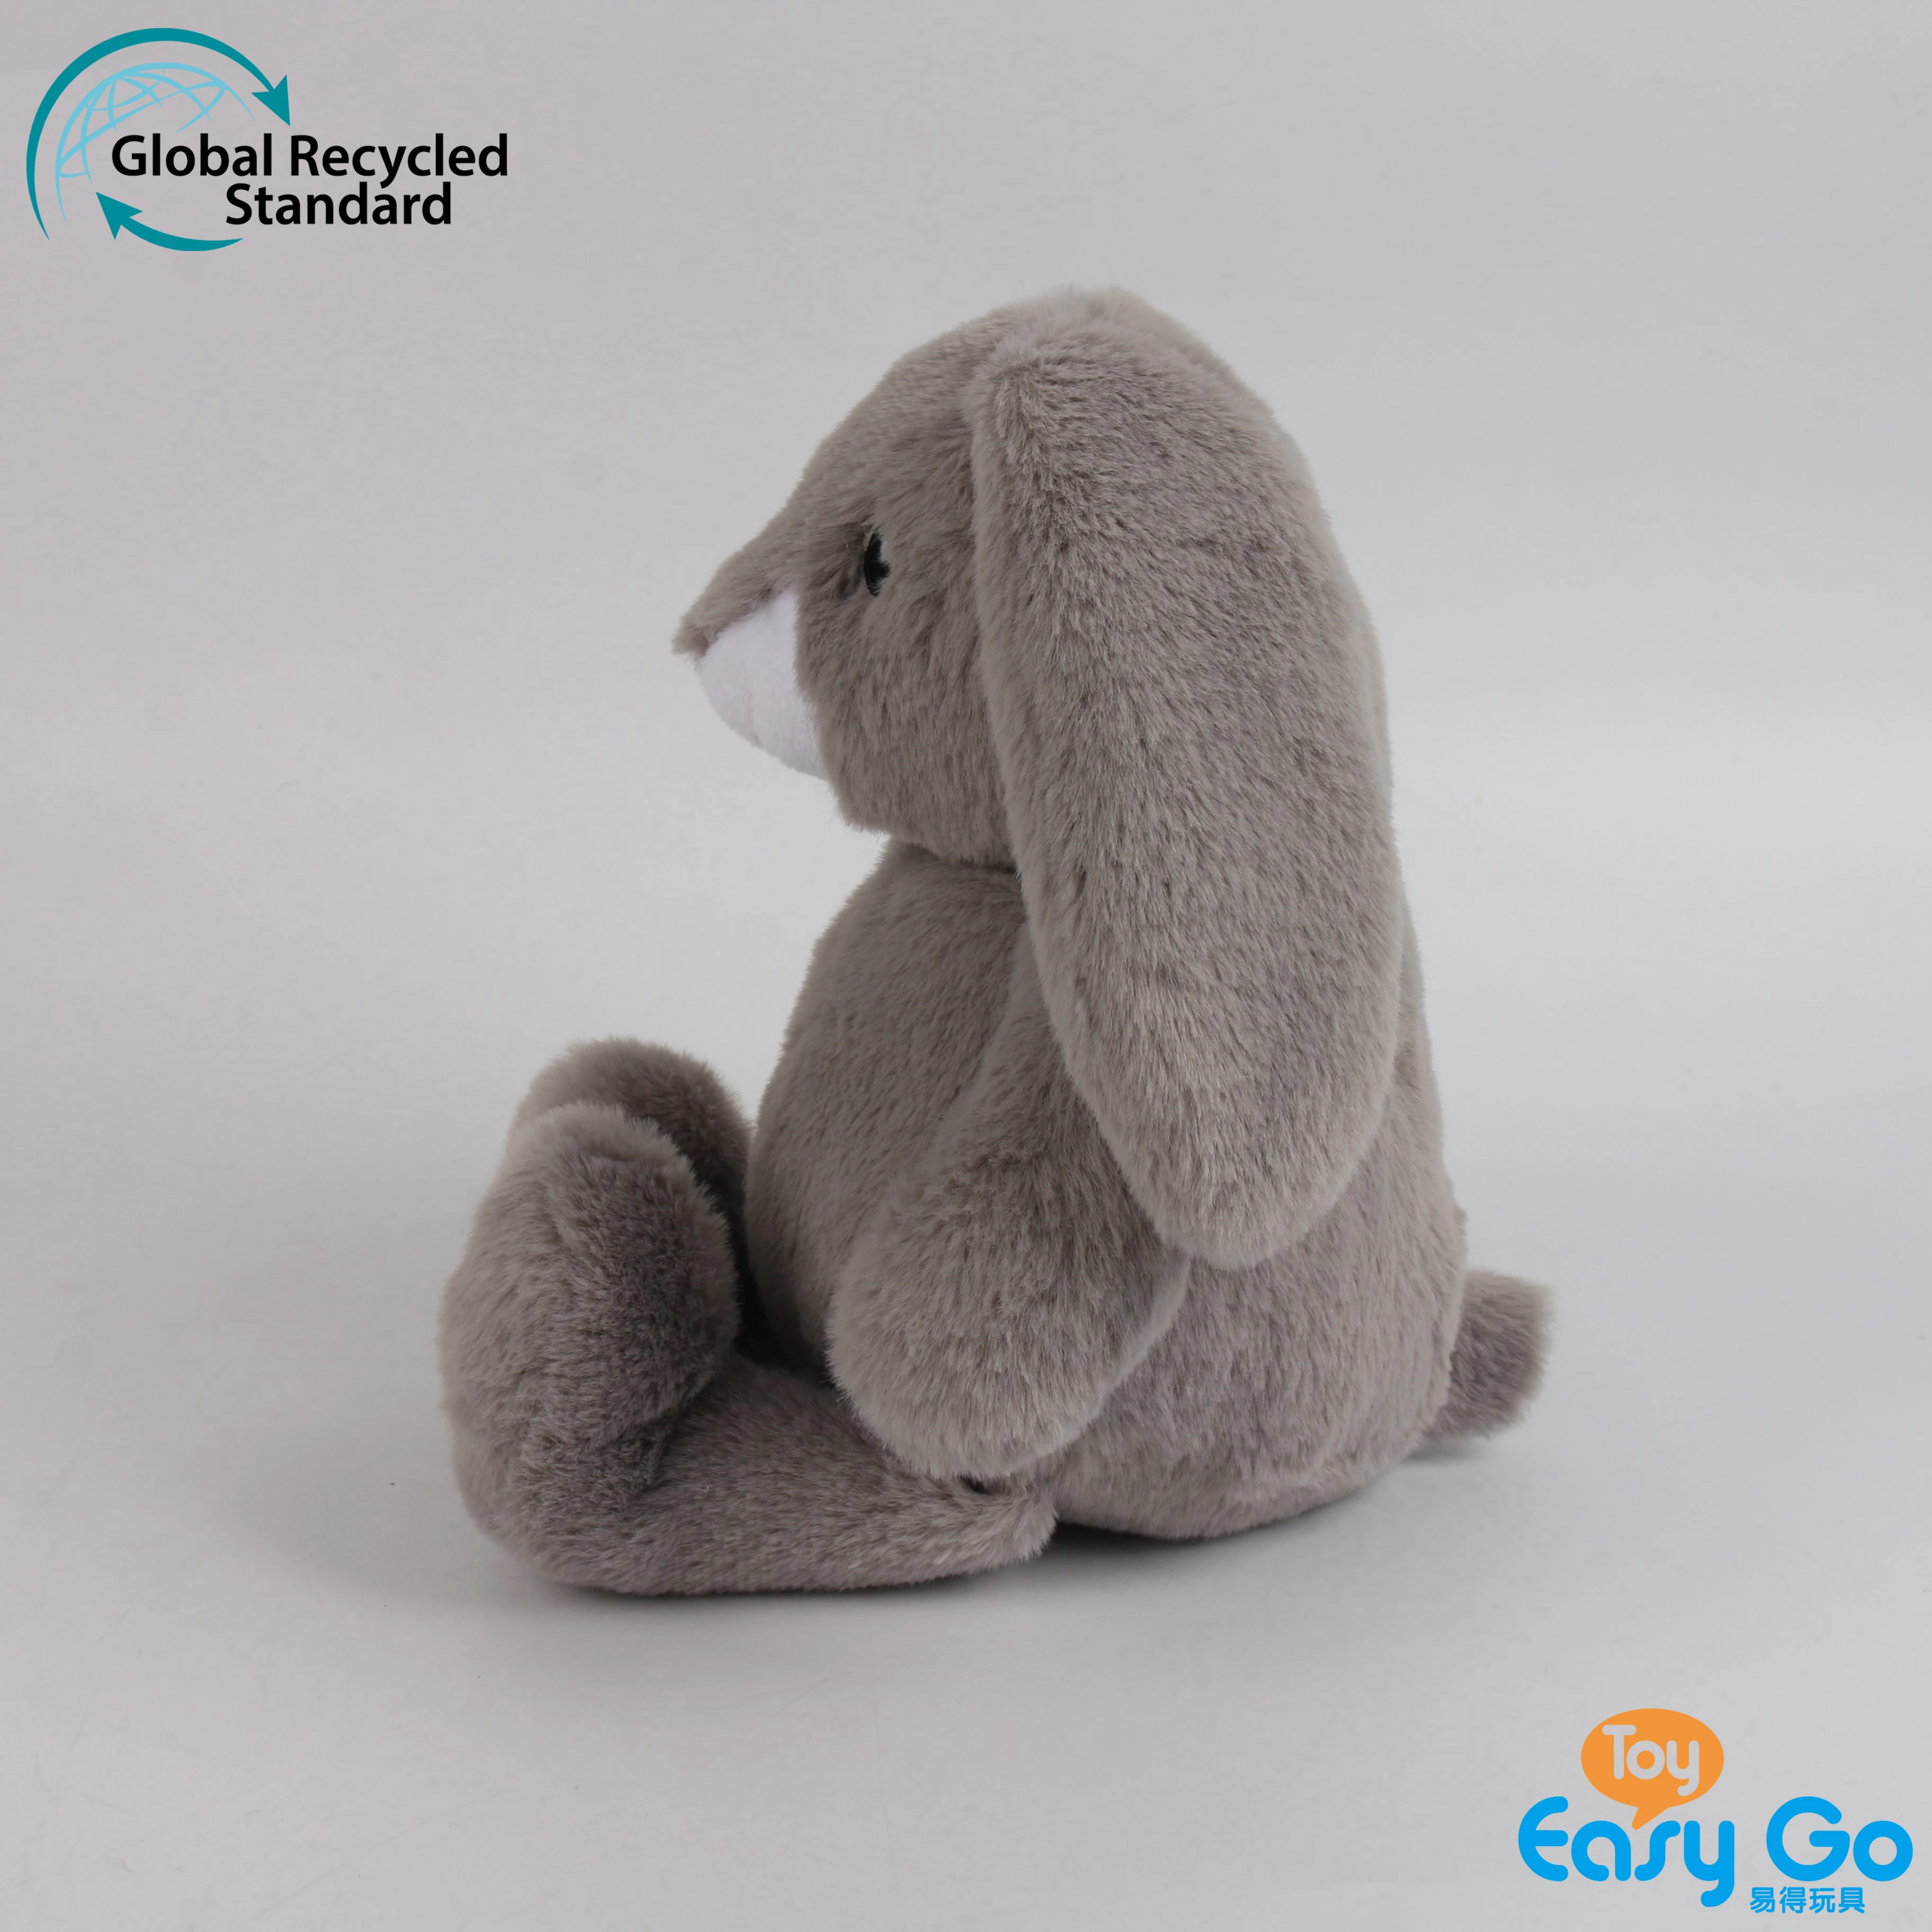 lovely New Soft Stuffed Rabbit plush toy,for kid&babay,100% recycled